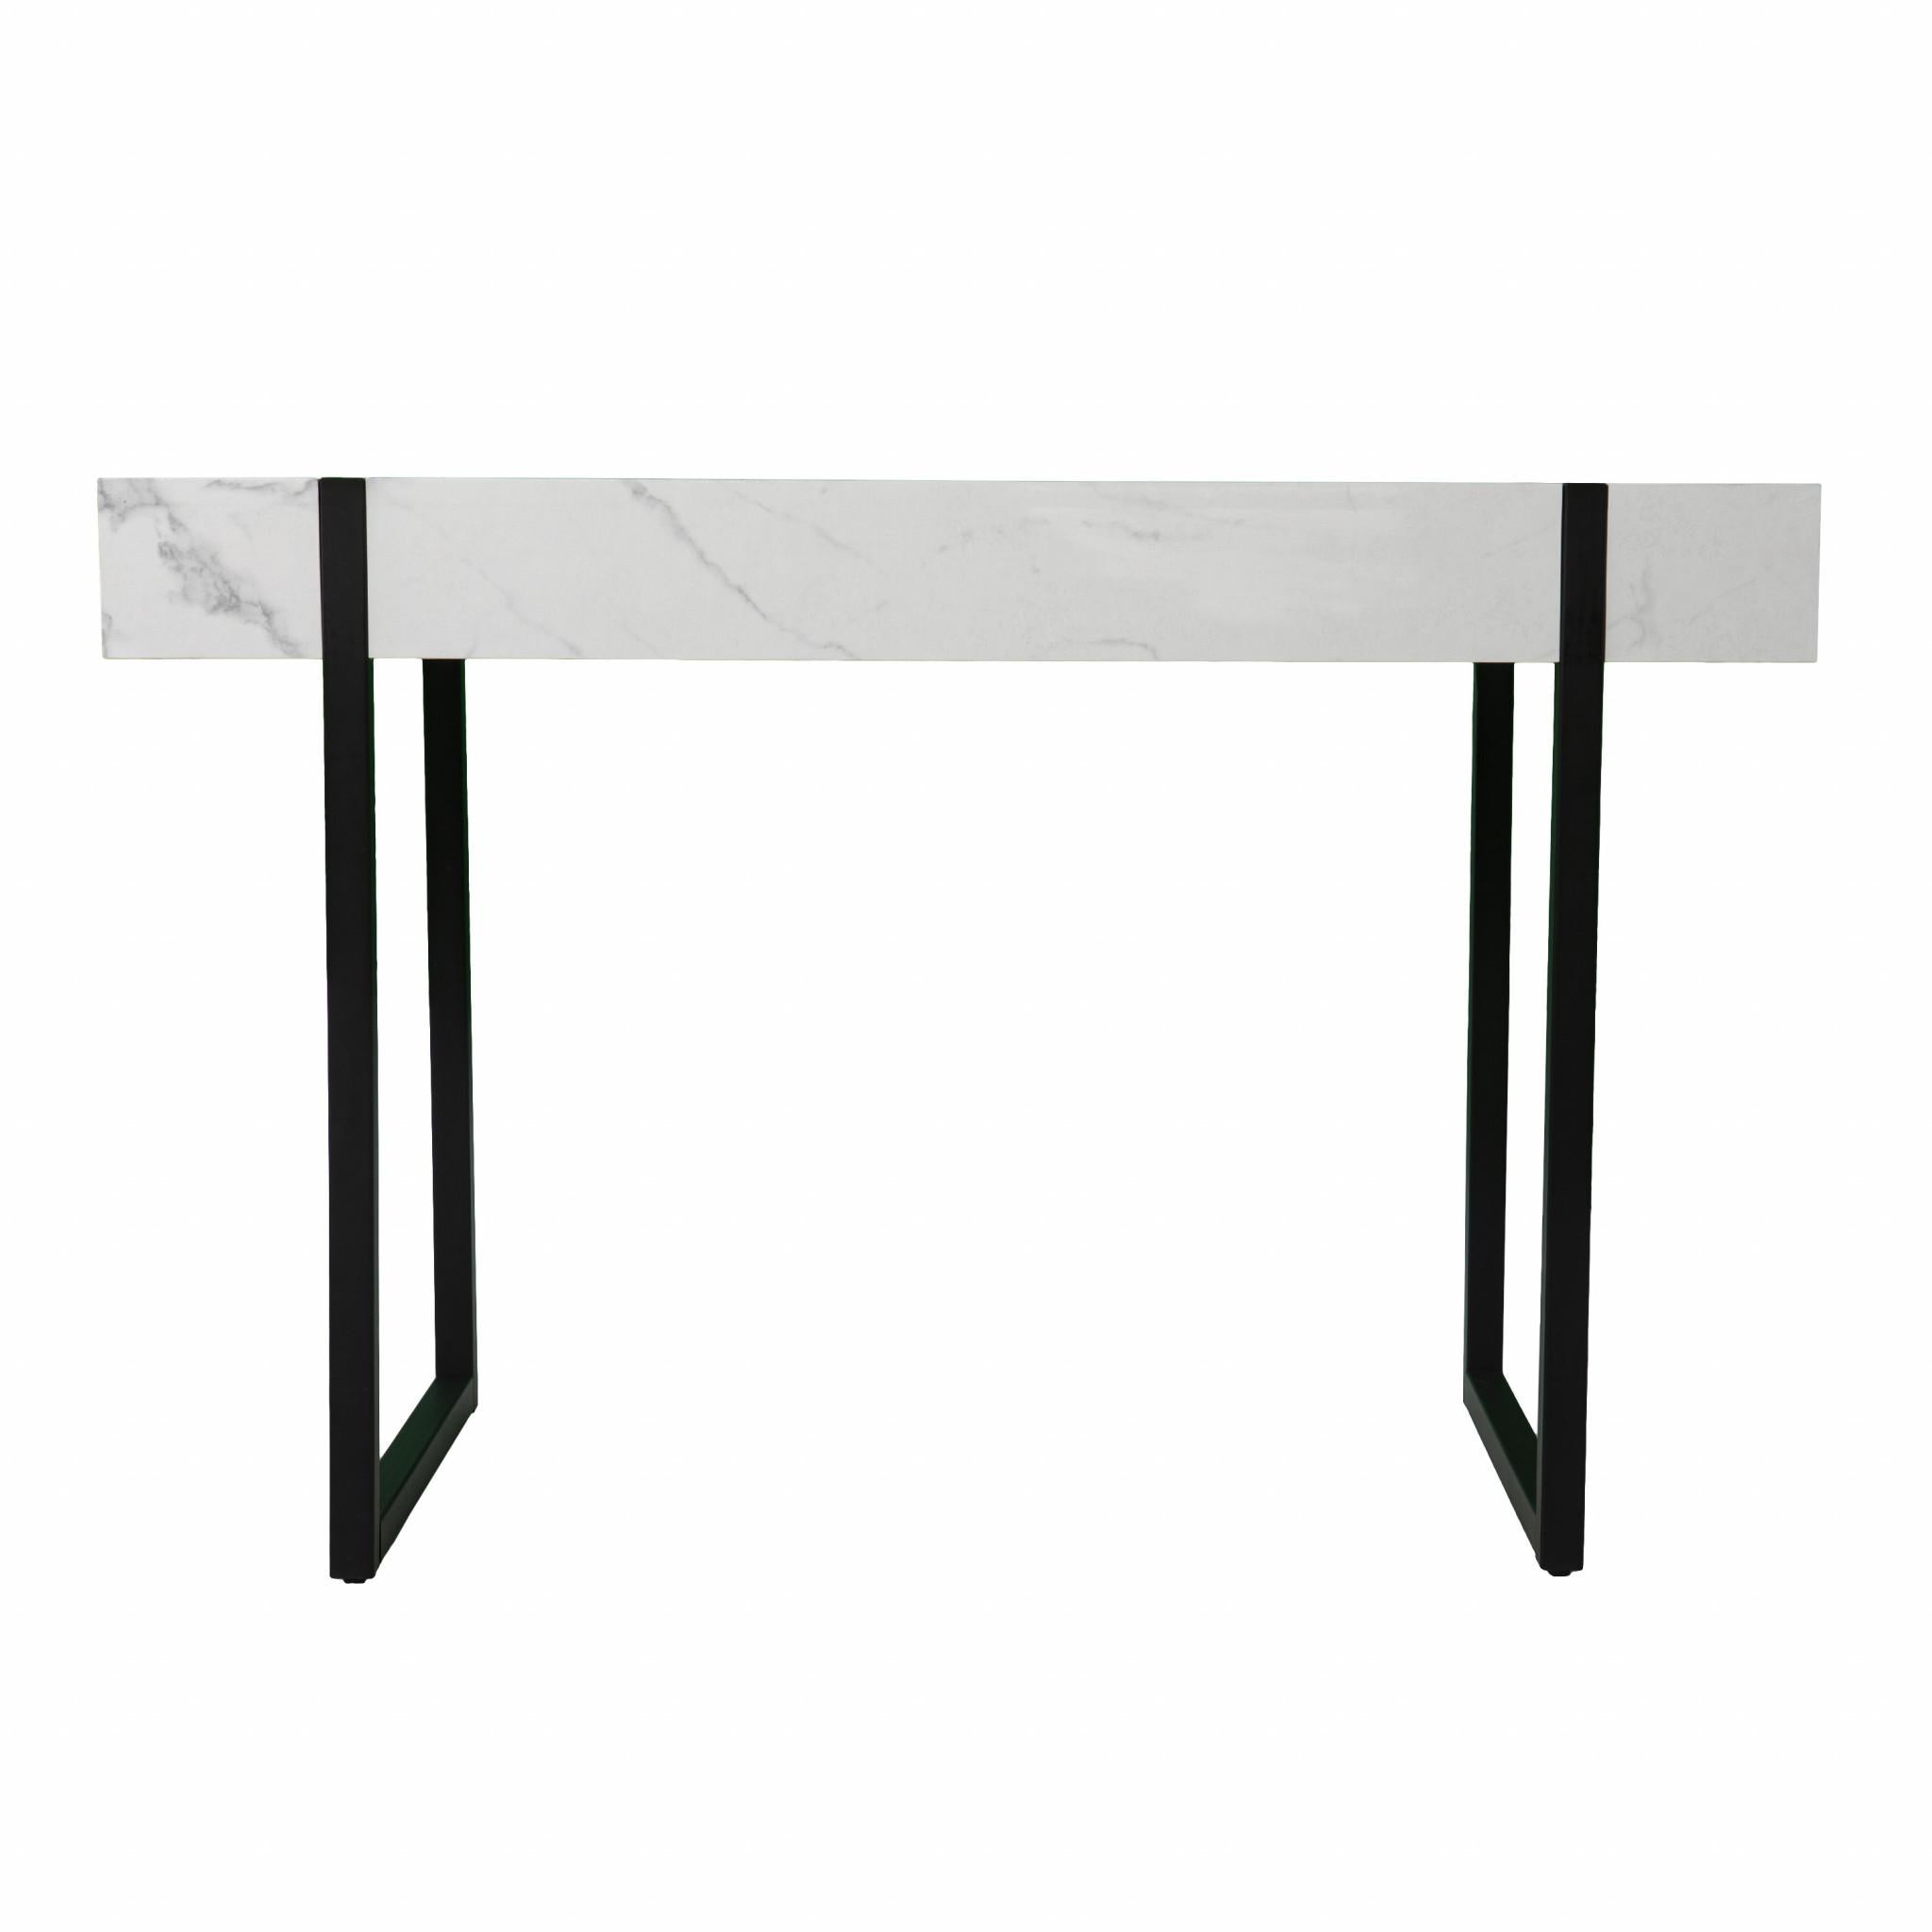 White Faux Marble Topped Desk